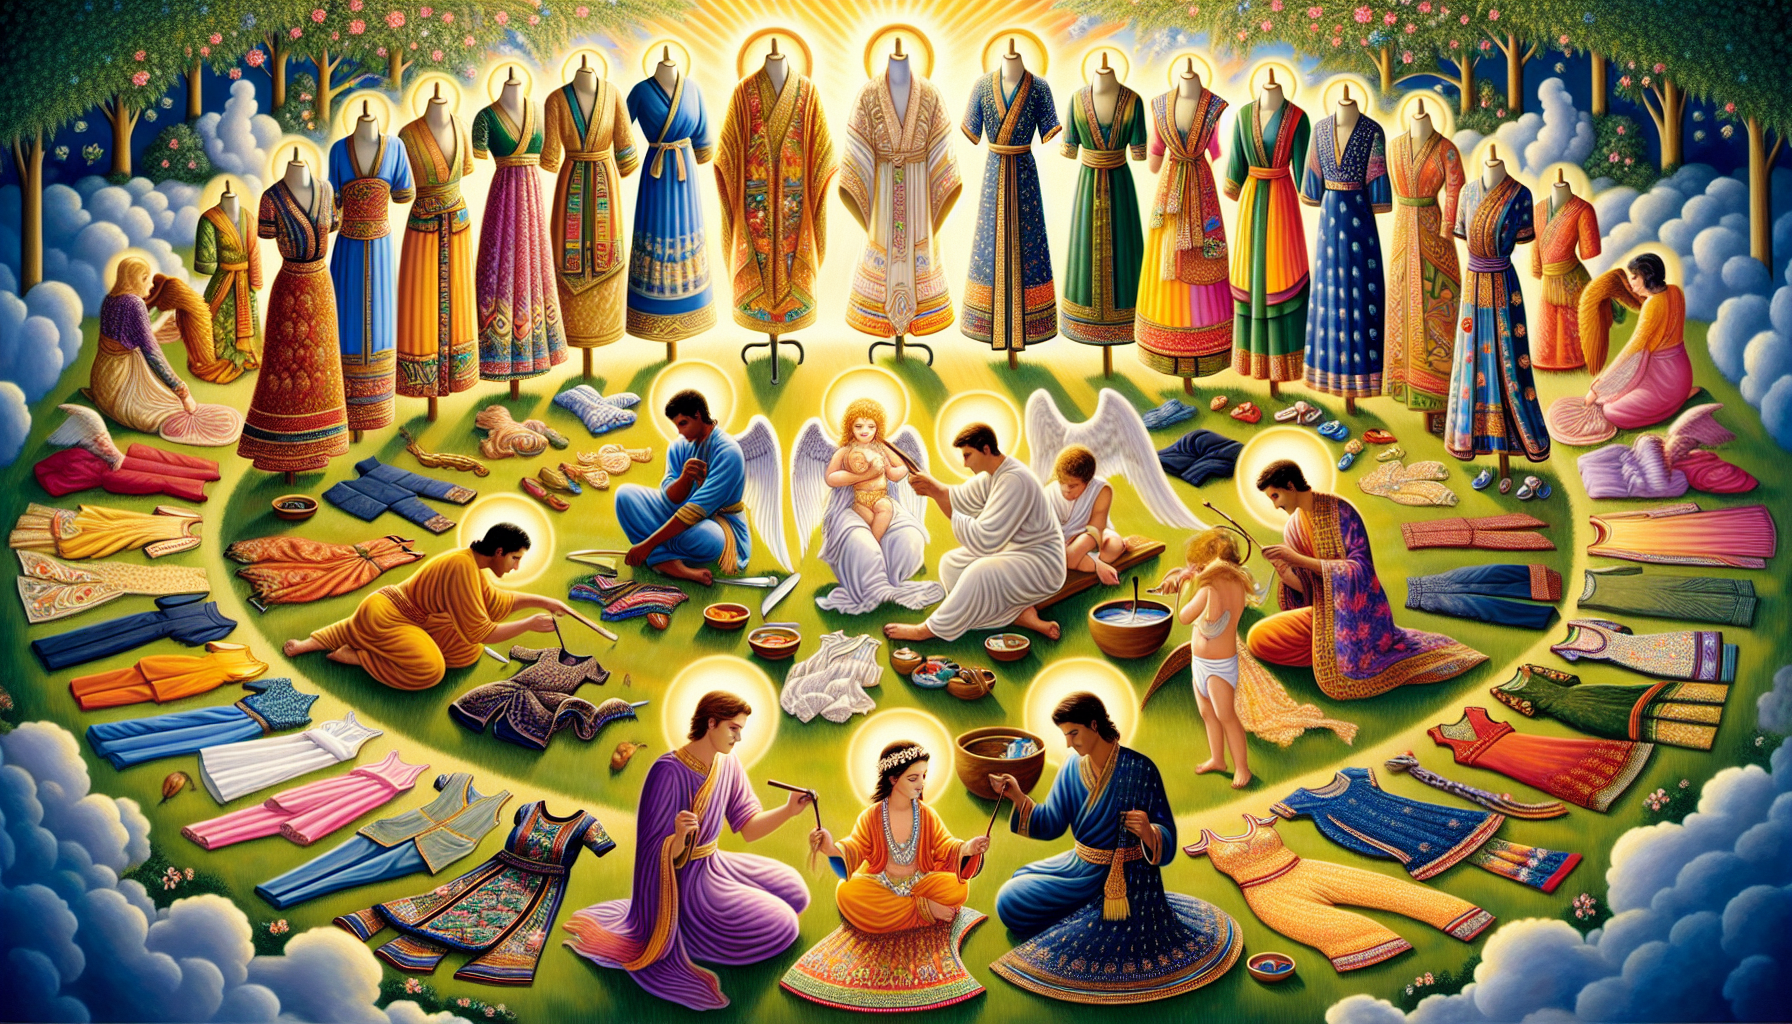 Vibrant illustration of various traditional outfits worn by the Divine Child Jesus, each reflecting different cultural interpretations from around the world, set in a peaceful, heavenly garden with an